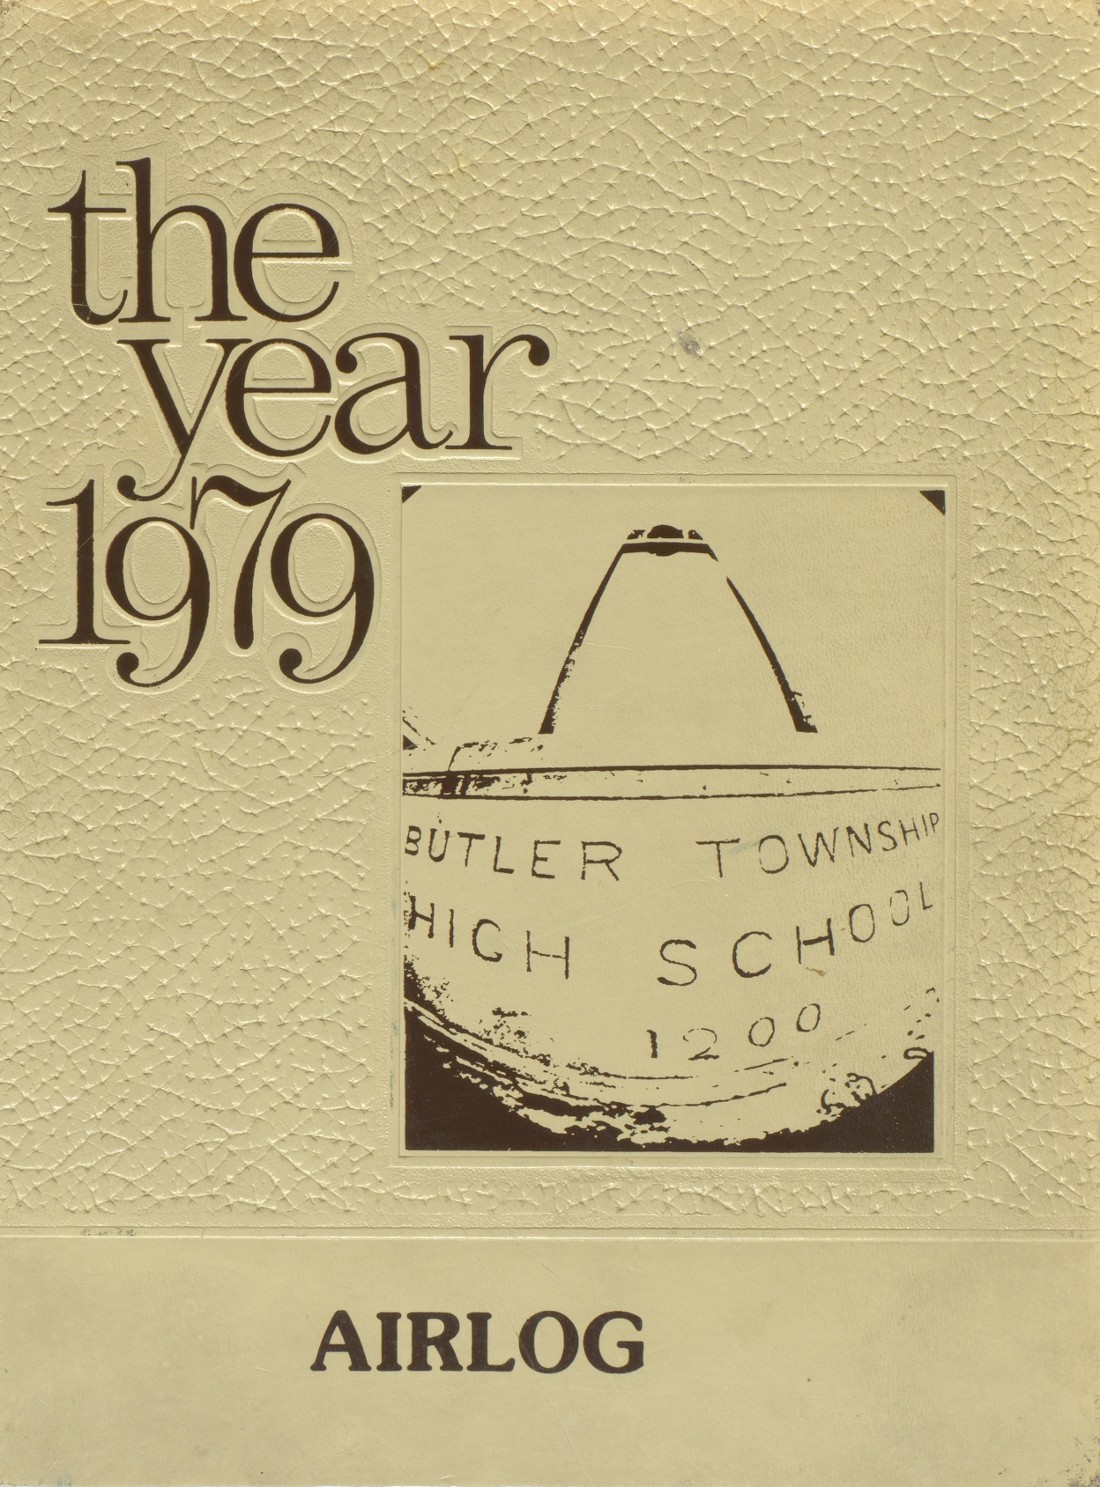 1979 yearbook from Butler High School from Vandalia, Ohio for sale